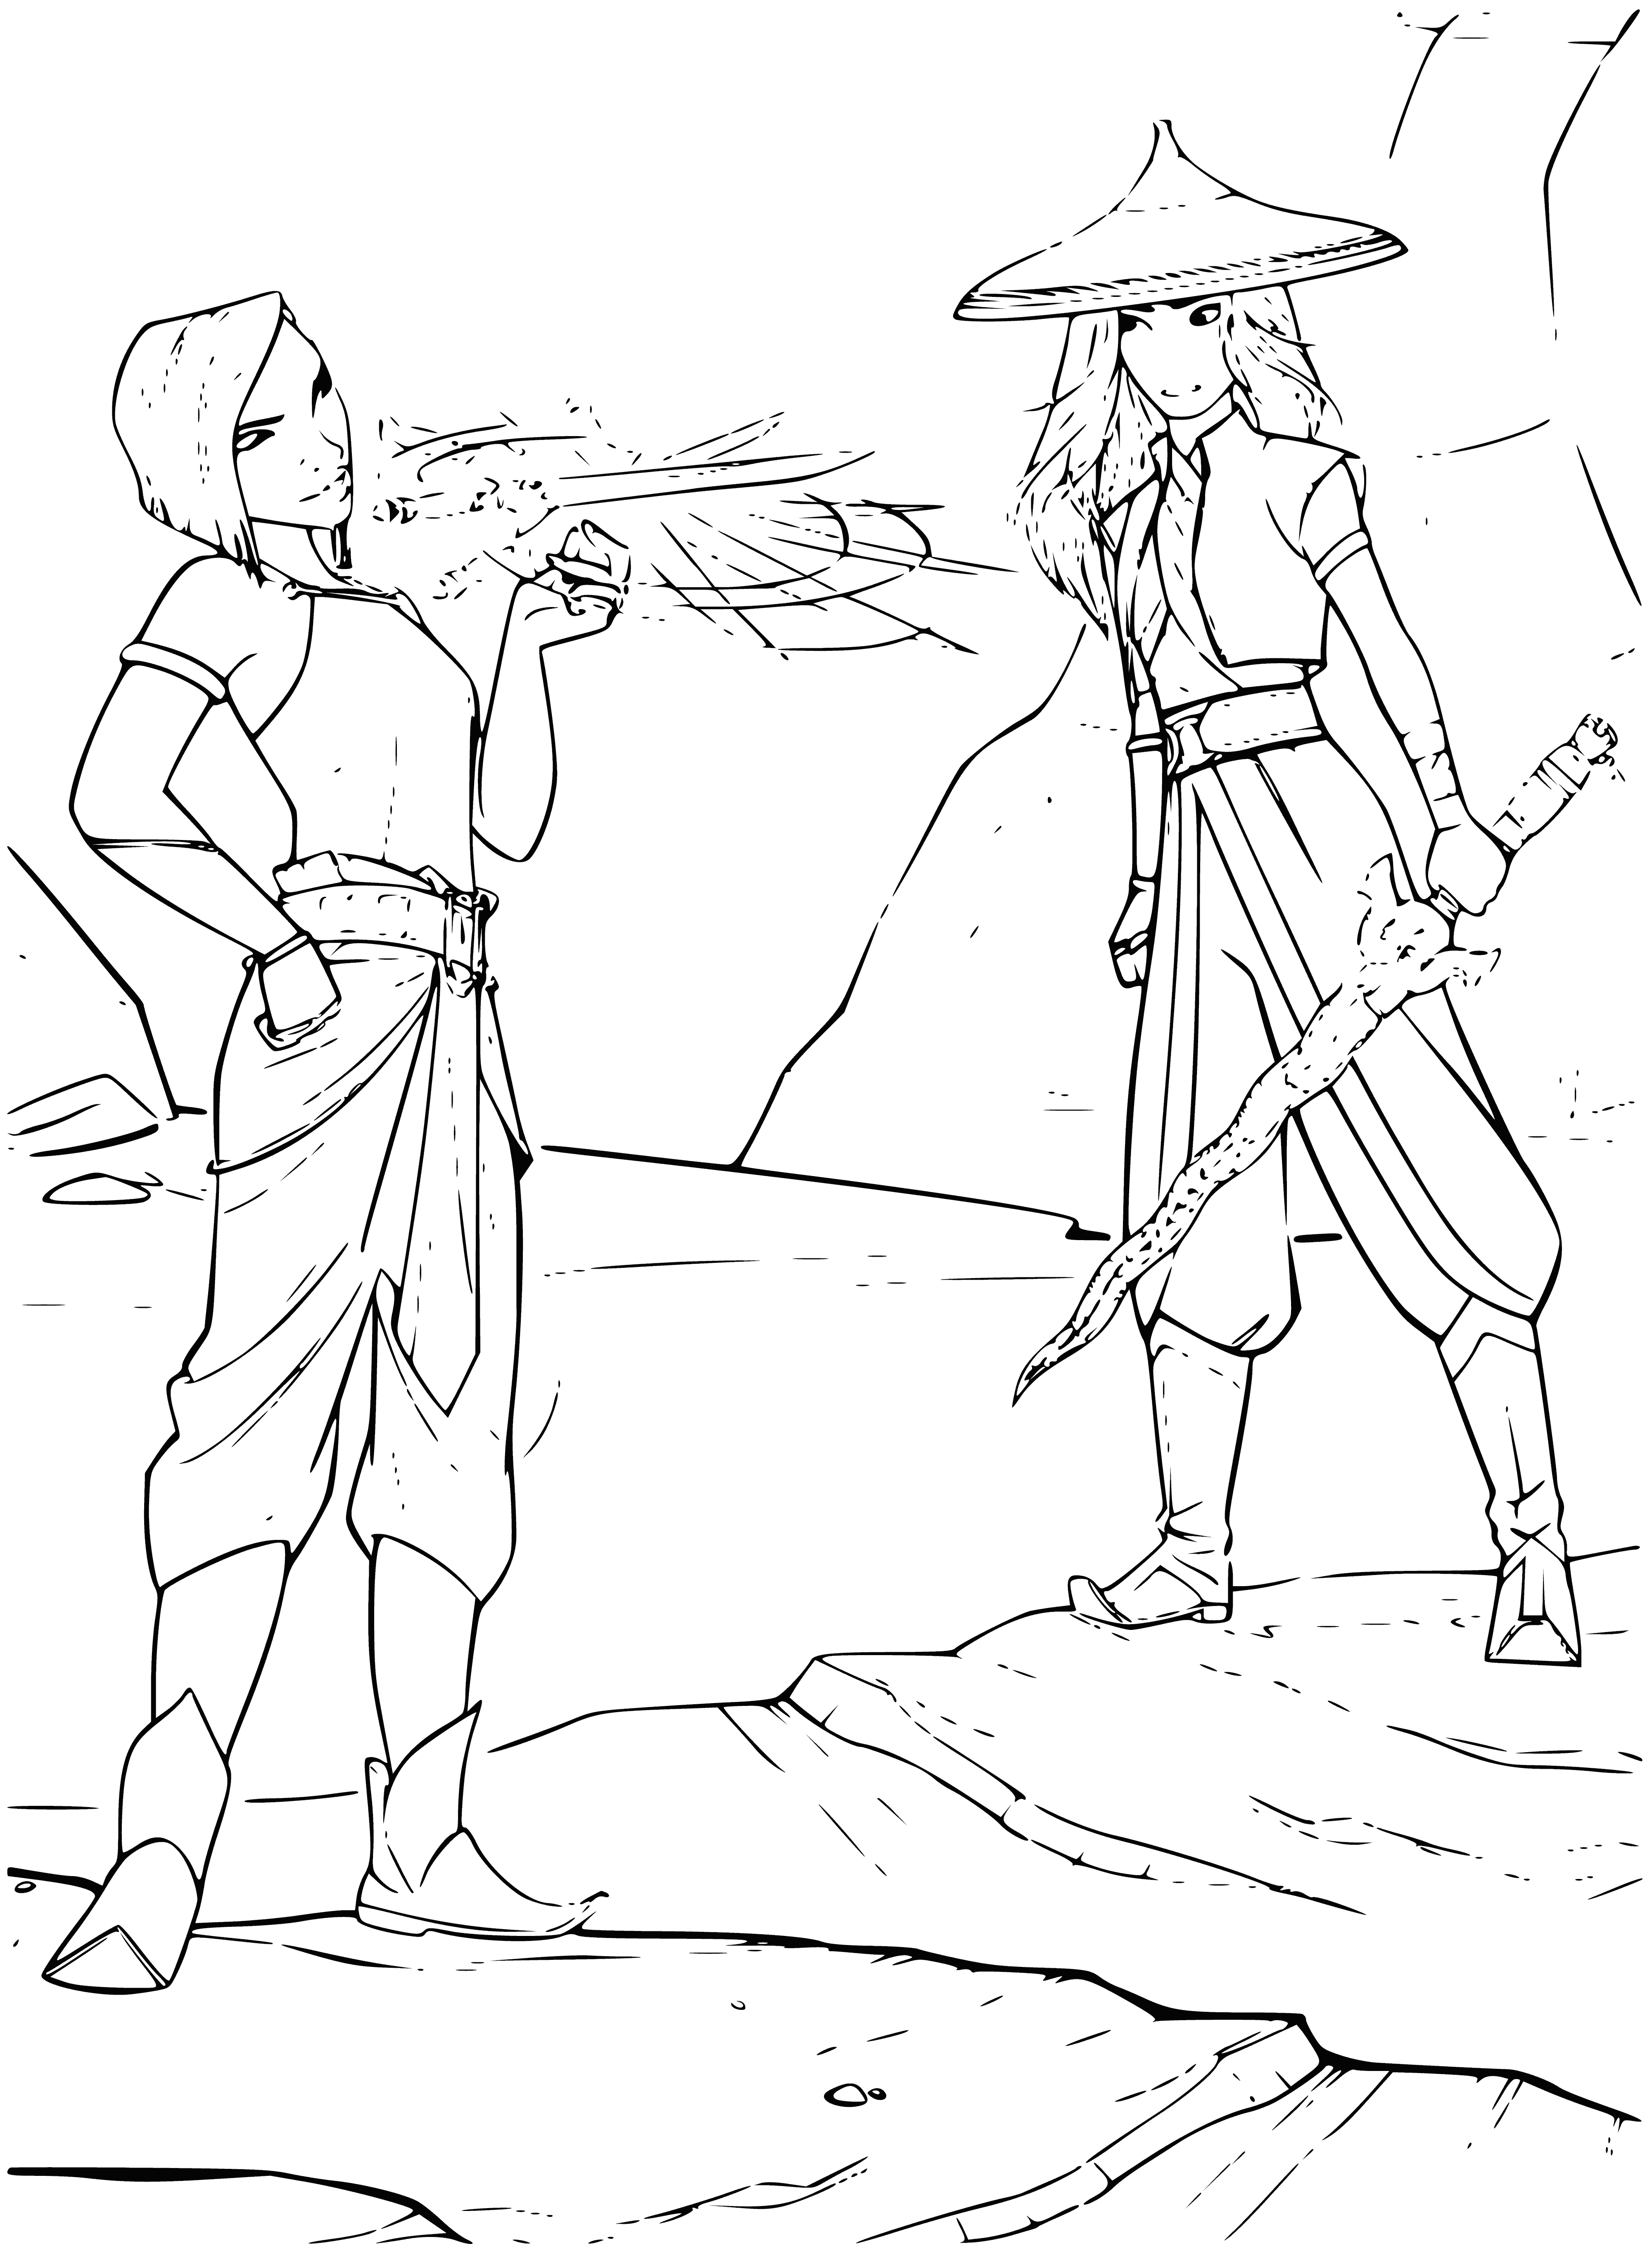 coloring page: Namari and Raya stand in a forest, warrior and dragon united by their courage. #AdventureAwaits